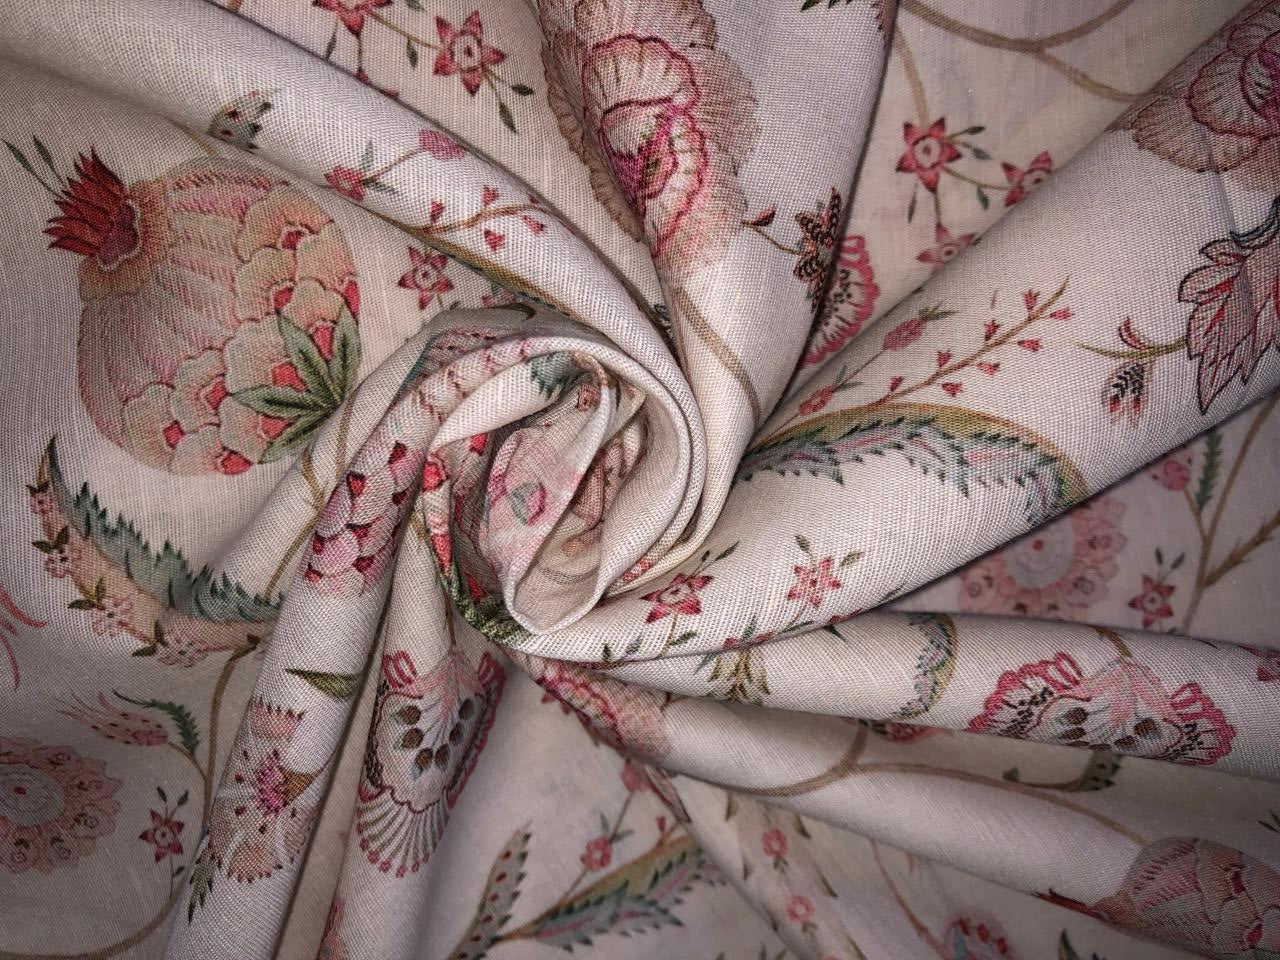 100% linen FLORAL digital print fabric 44" wide available in 2 colors grey/pink and ivory/pink  [15957/15958]